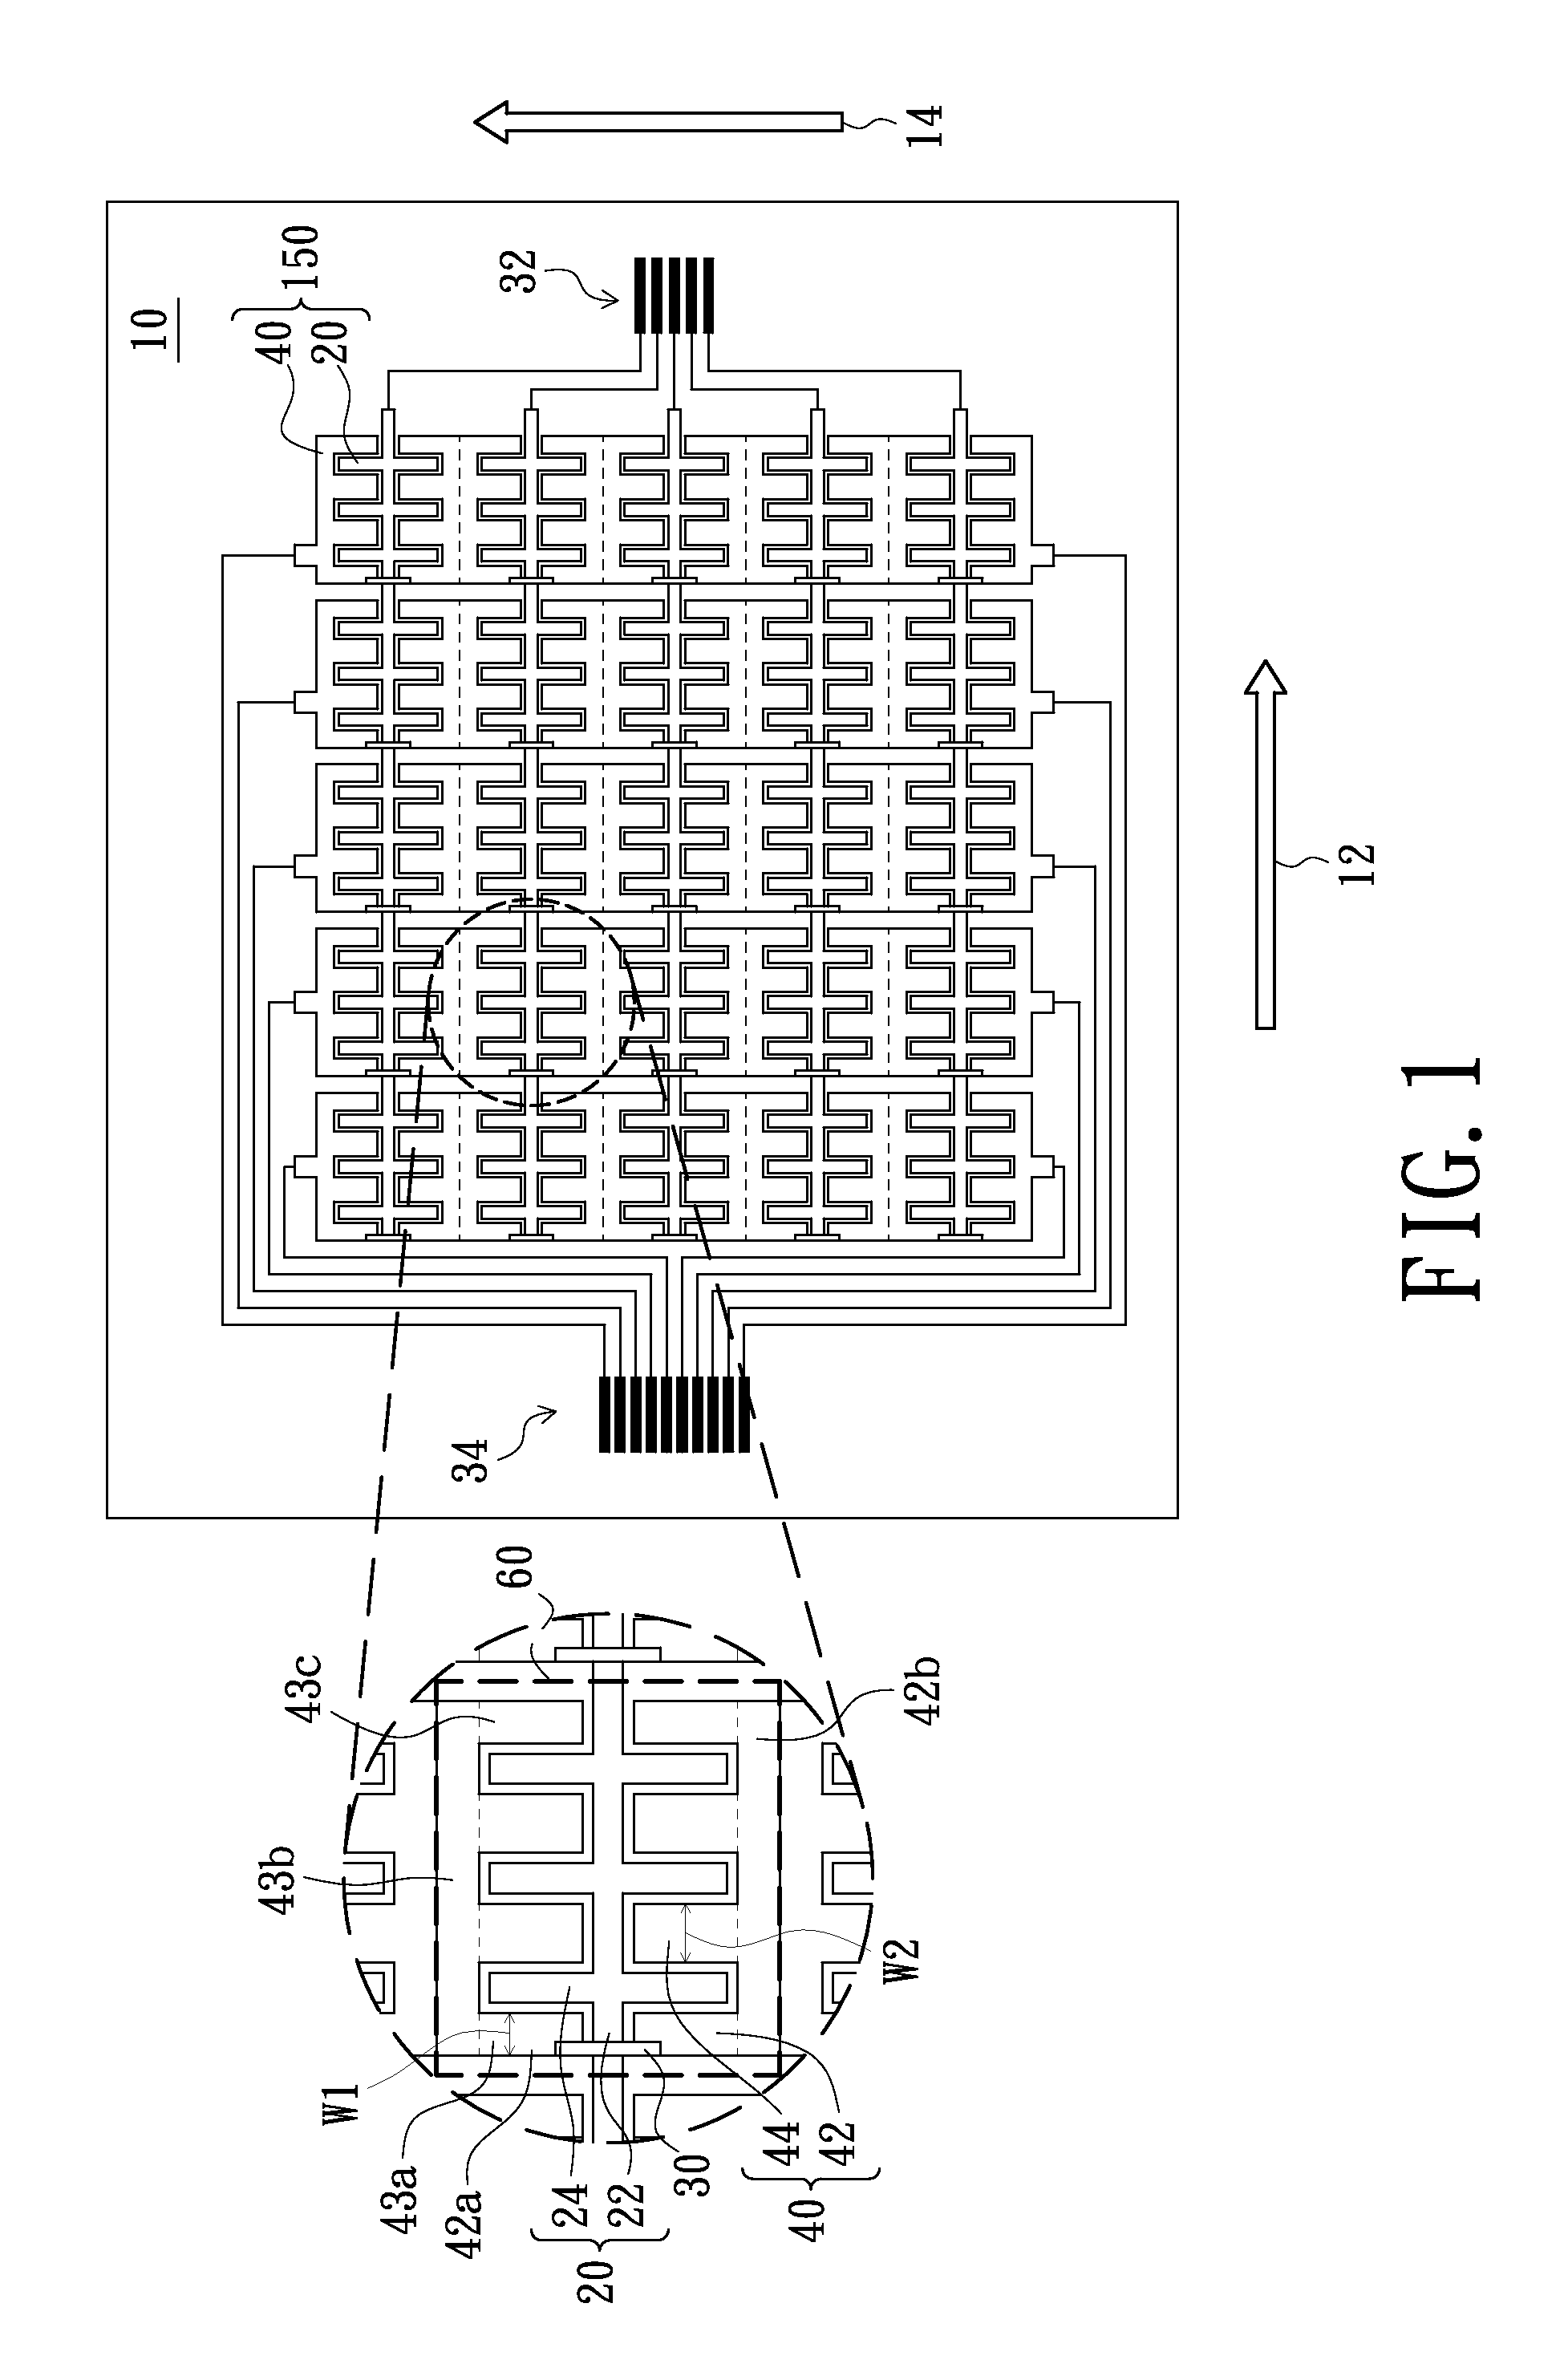 Touch display apparatus and touch sensing device thereof